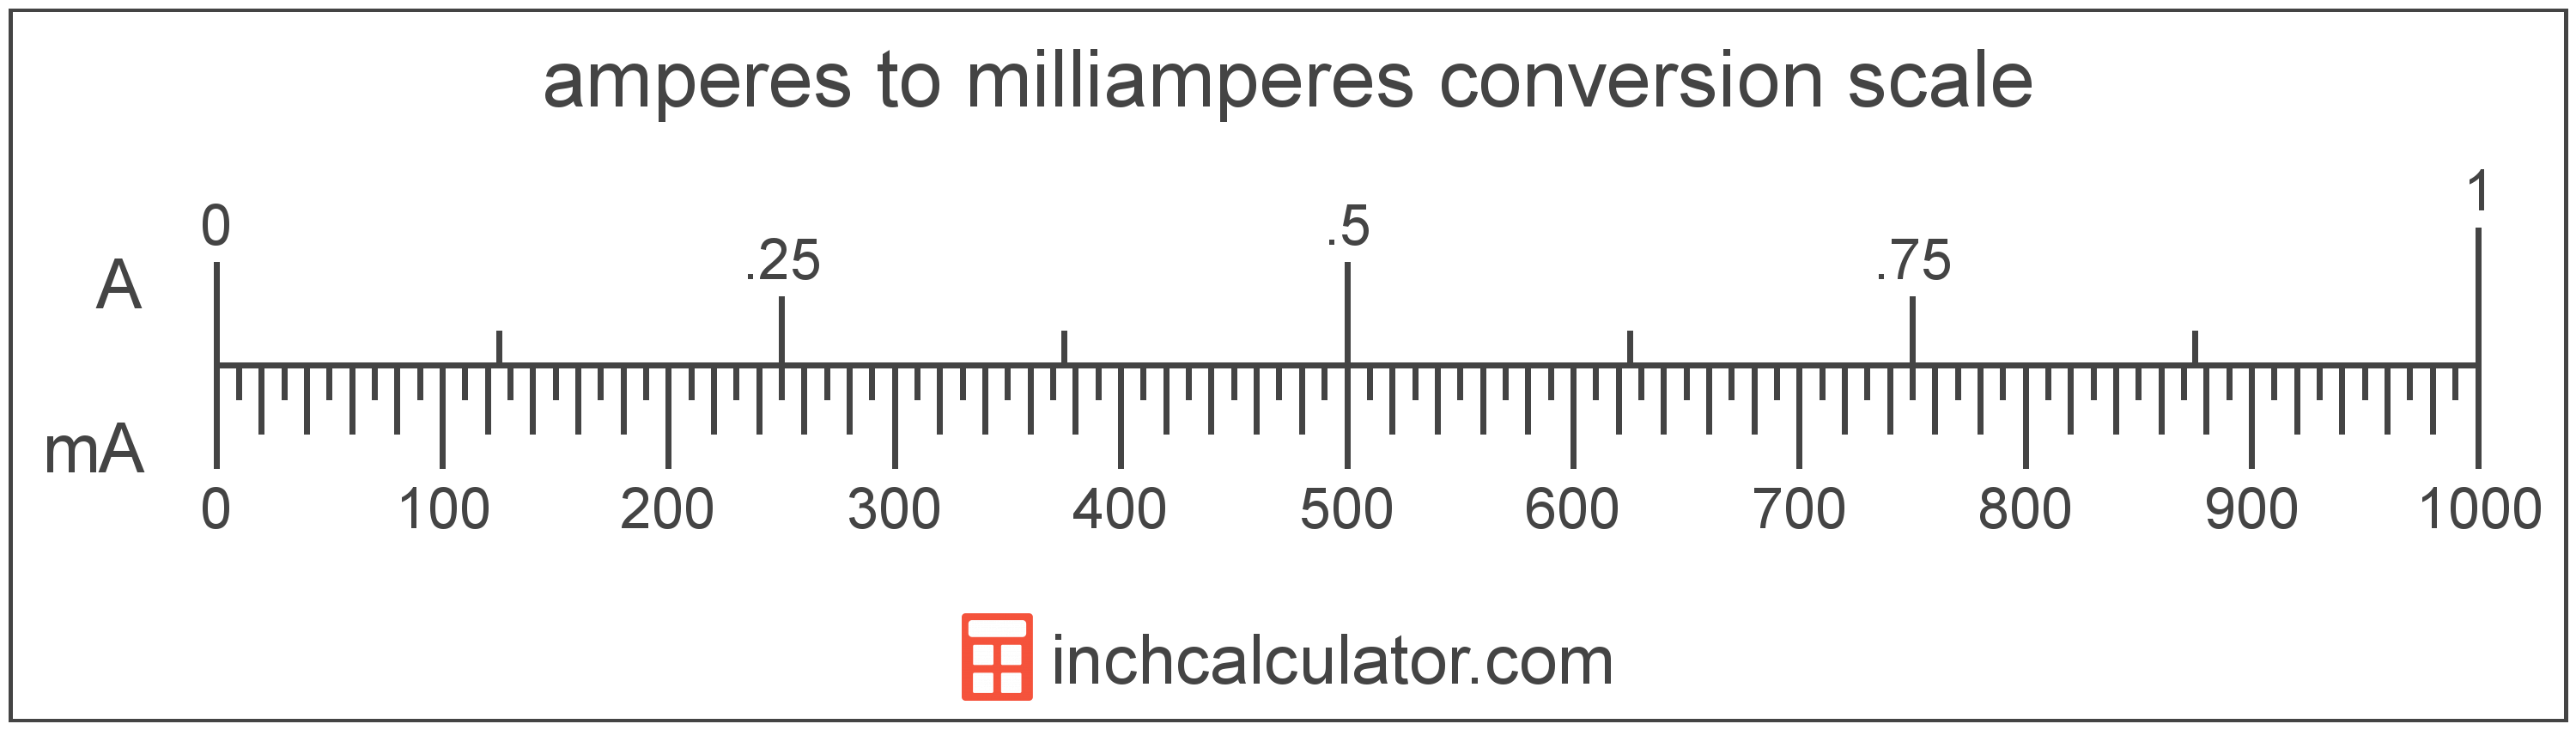 milliamperes-to-amperes-conversion-ma-to-a-inch-calculator